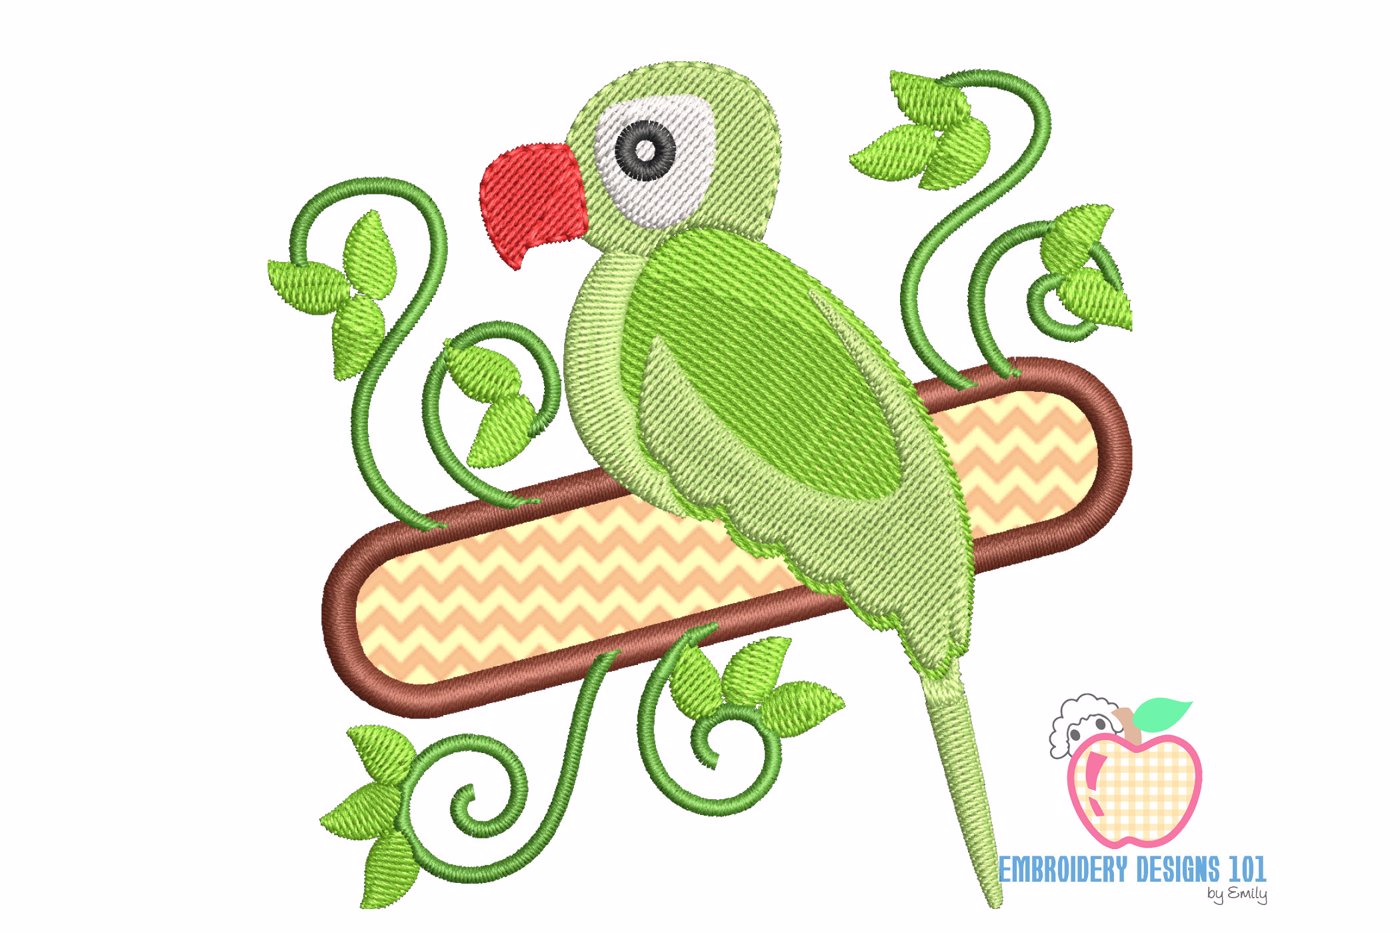 A Parrot Sitting On The Branch With Flowers Applique